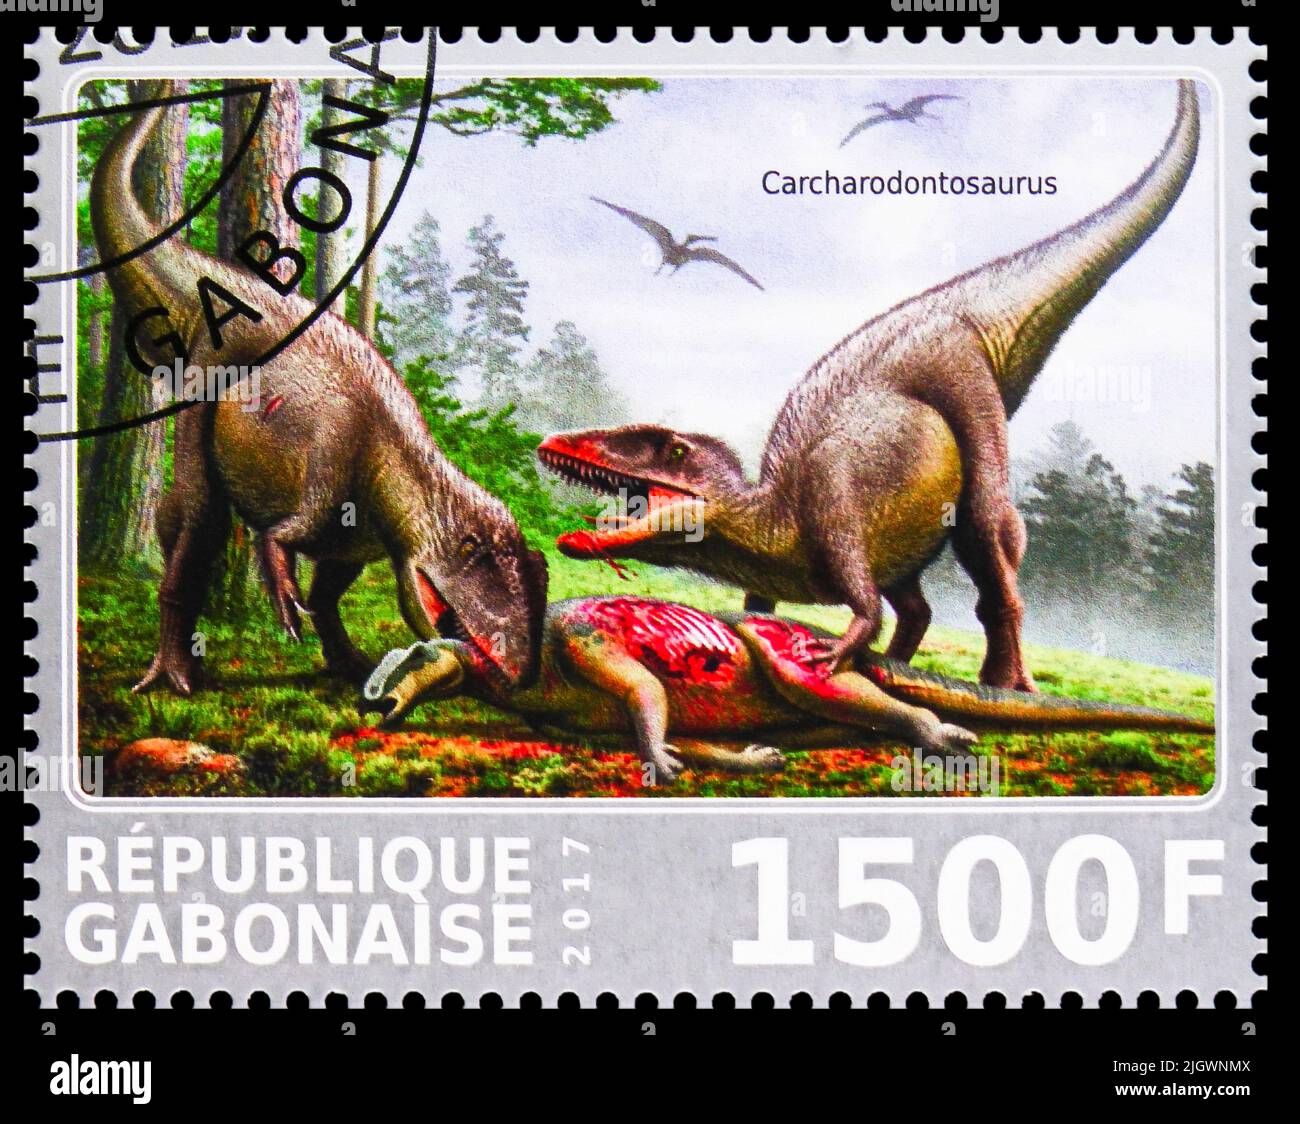 MOSCOW, RUSSIA - JUNE 17, 2022: Postage stamp printed in Gabon shows Carcharodontosaurus eating, Dinosaurs serie, circa 2017 Stock Photo